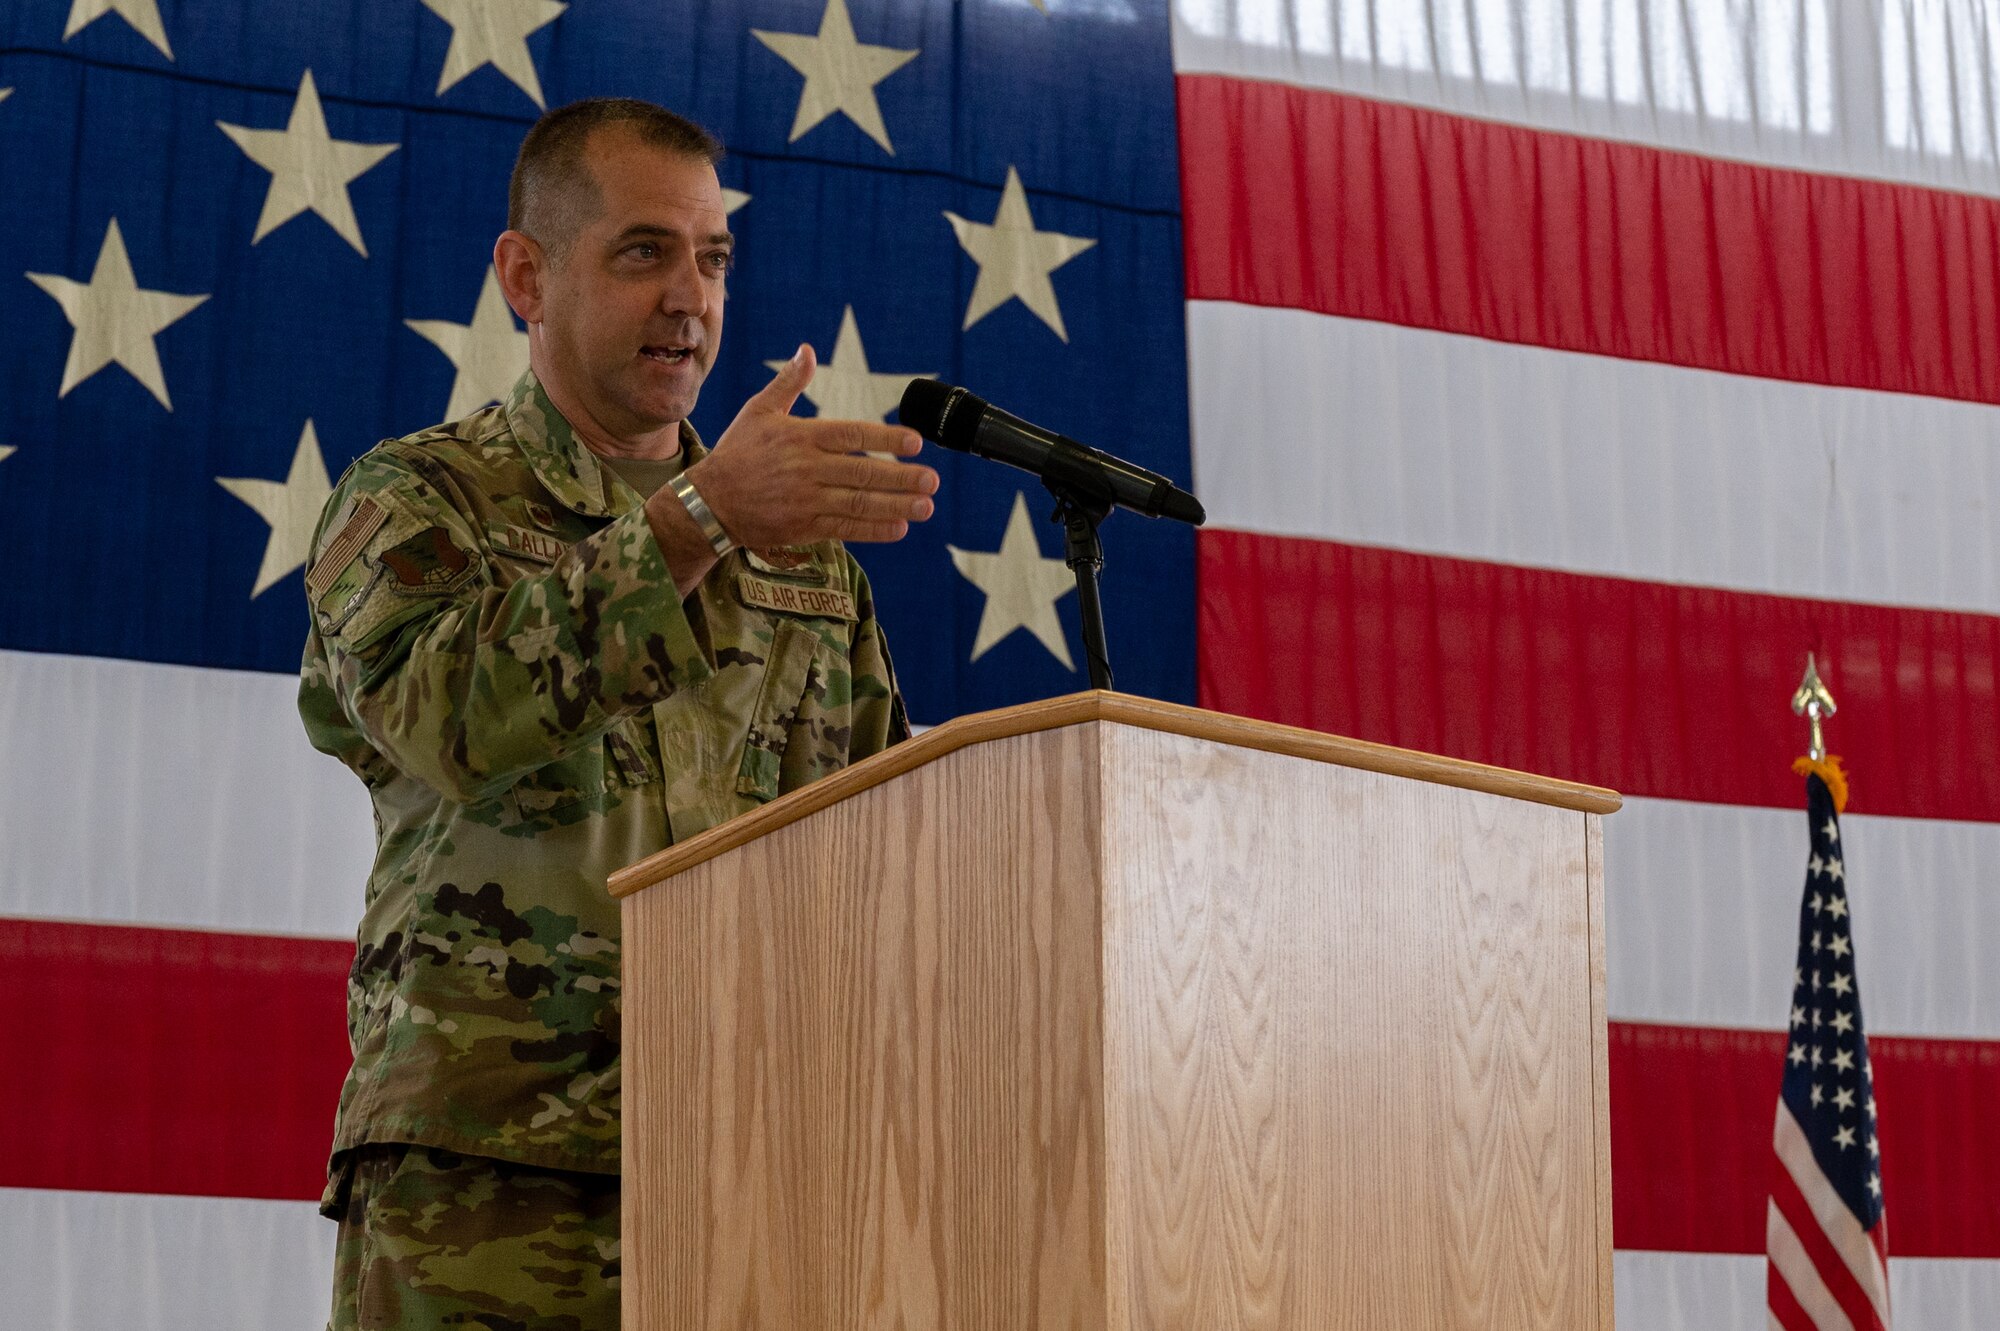 A commander standing behind a podium.